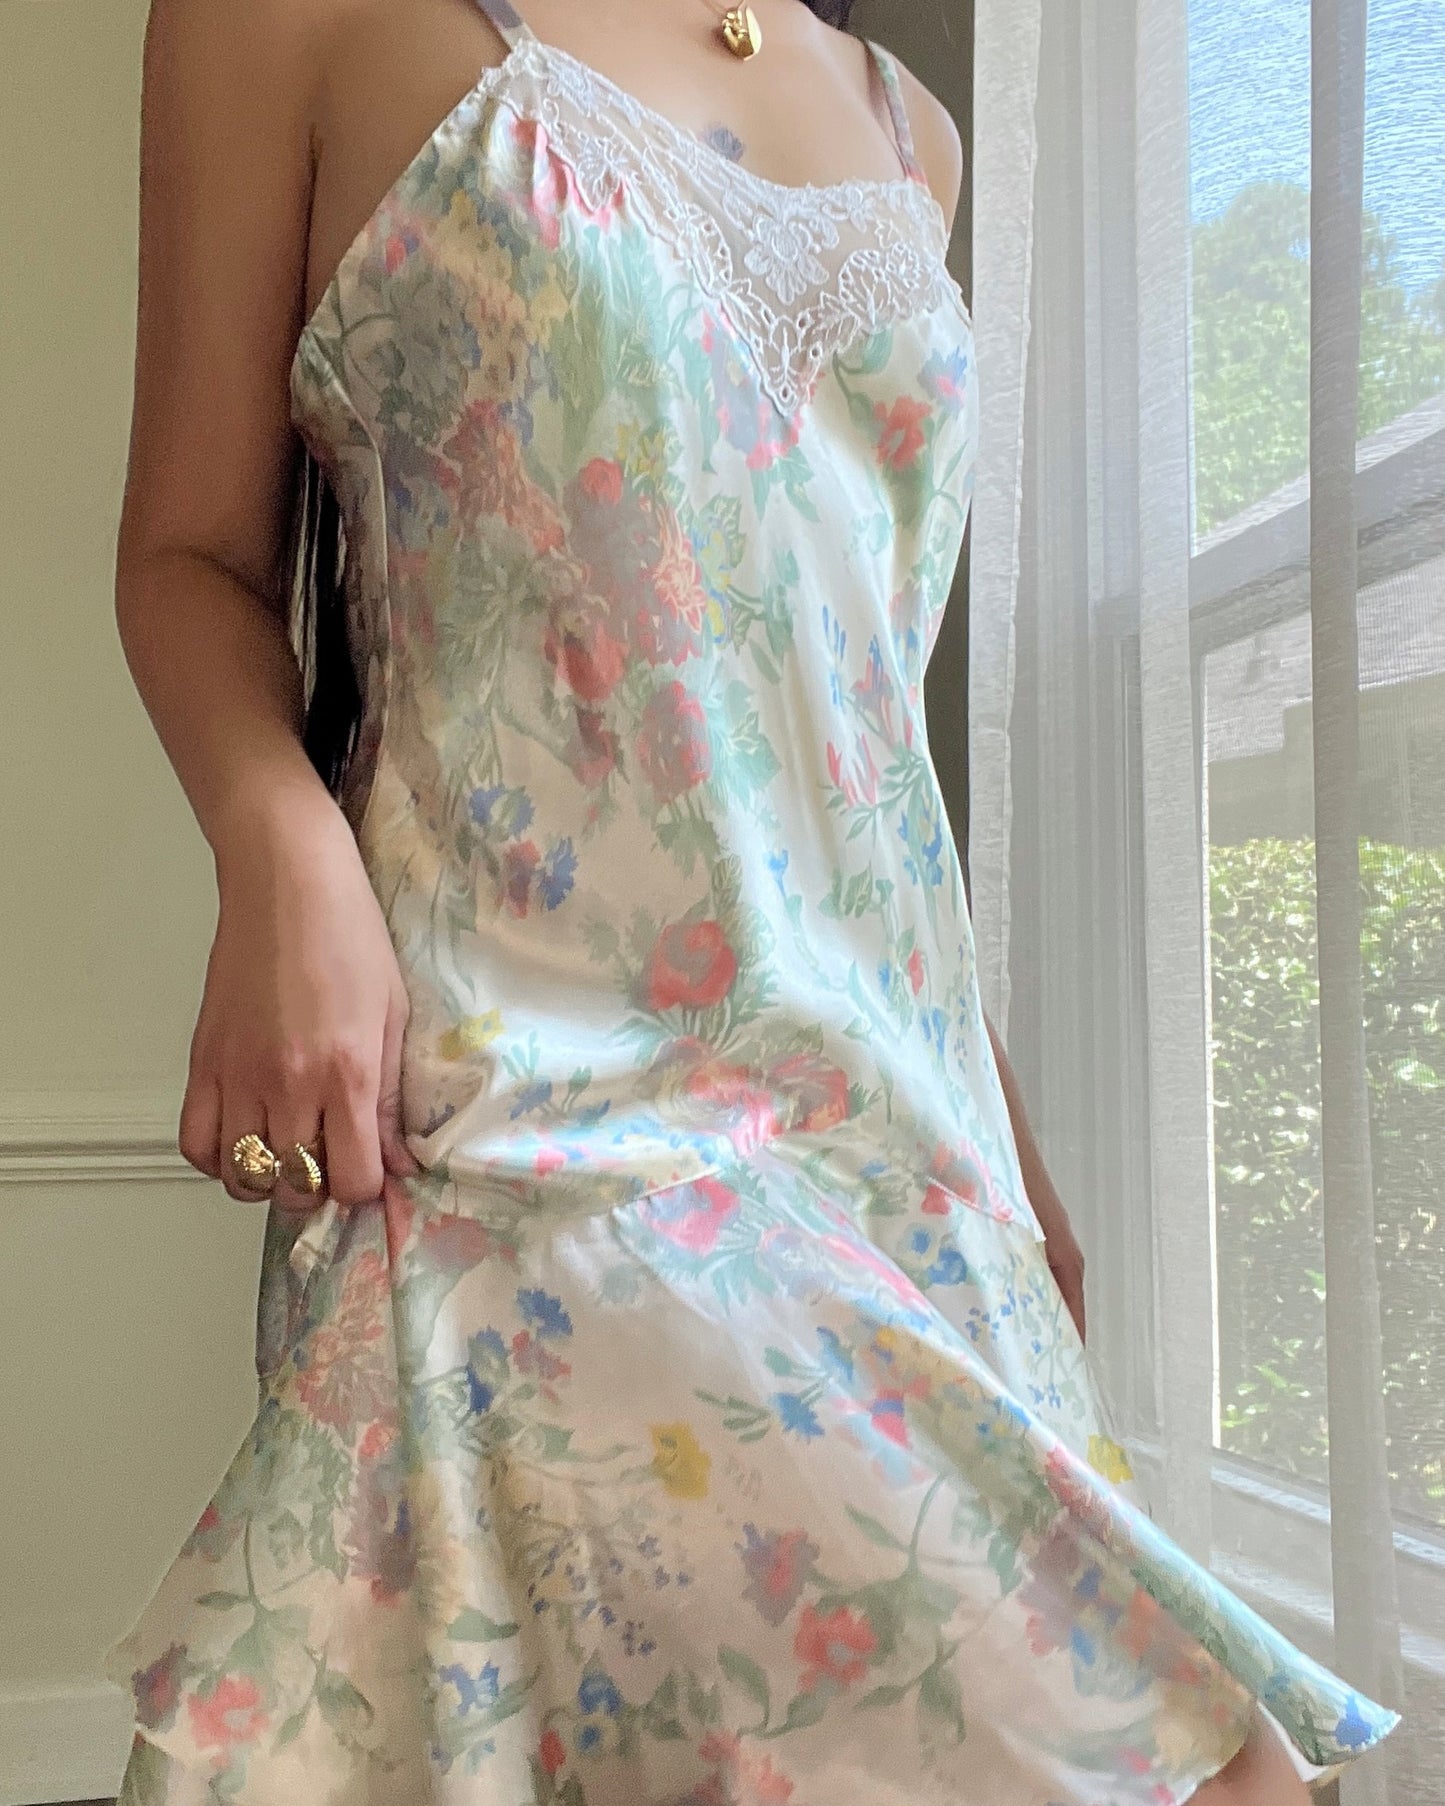 Victoria’s Secret Special Midi Dress featuring Spring Floral Prints on Satin Fabric